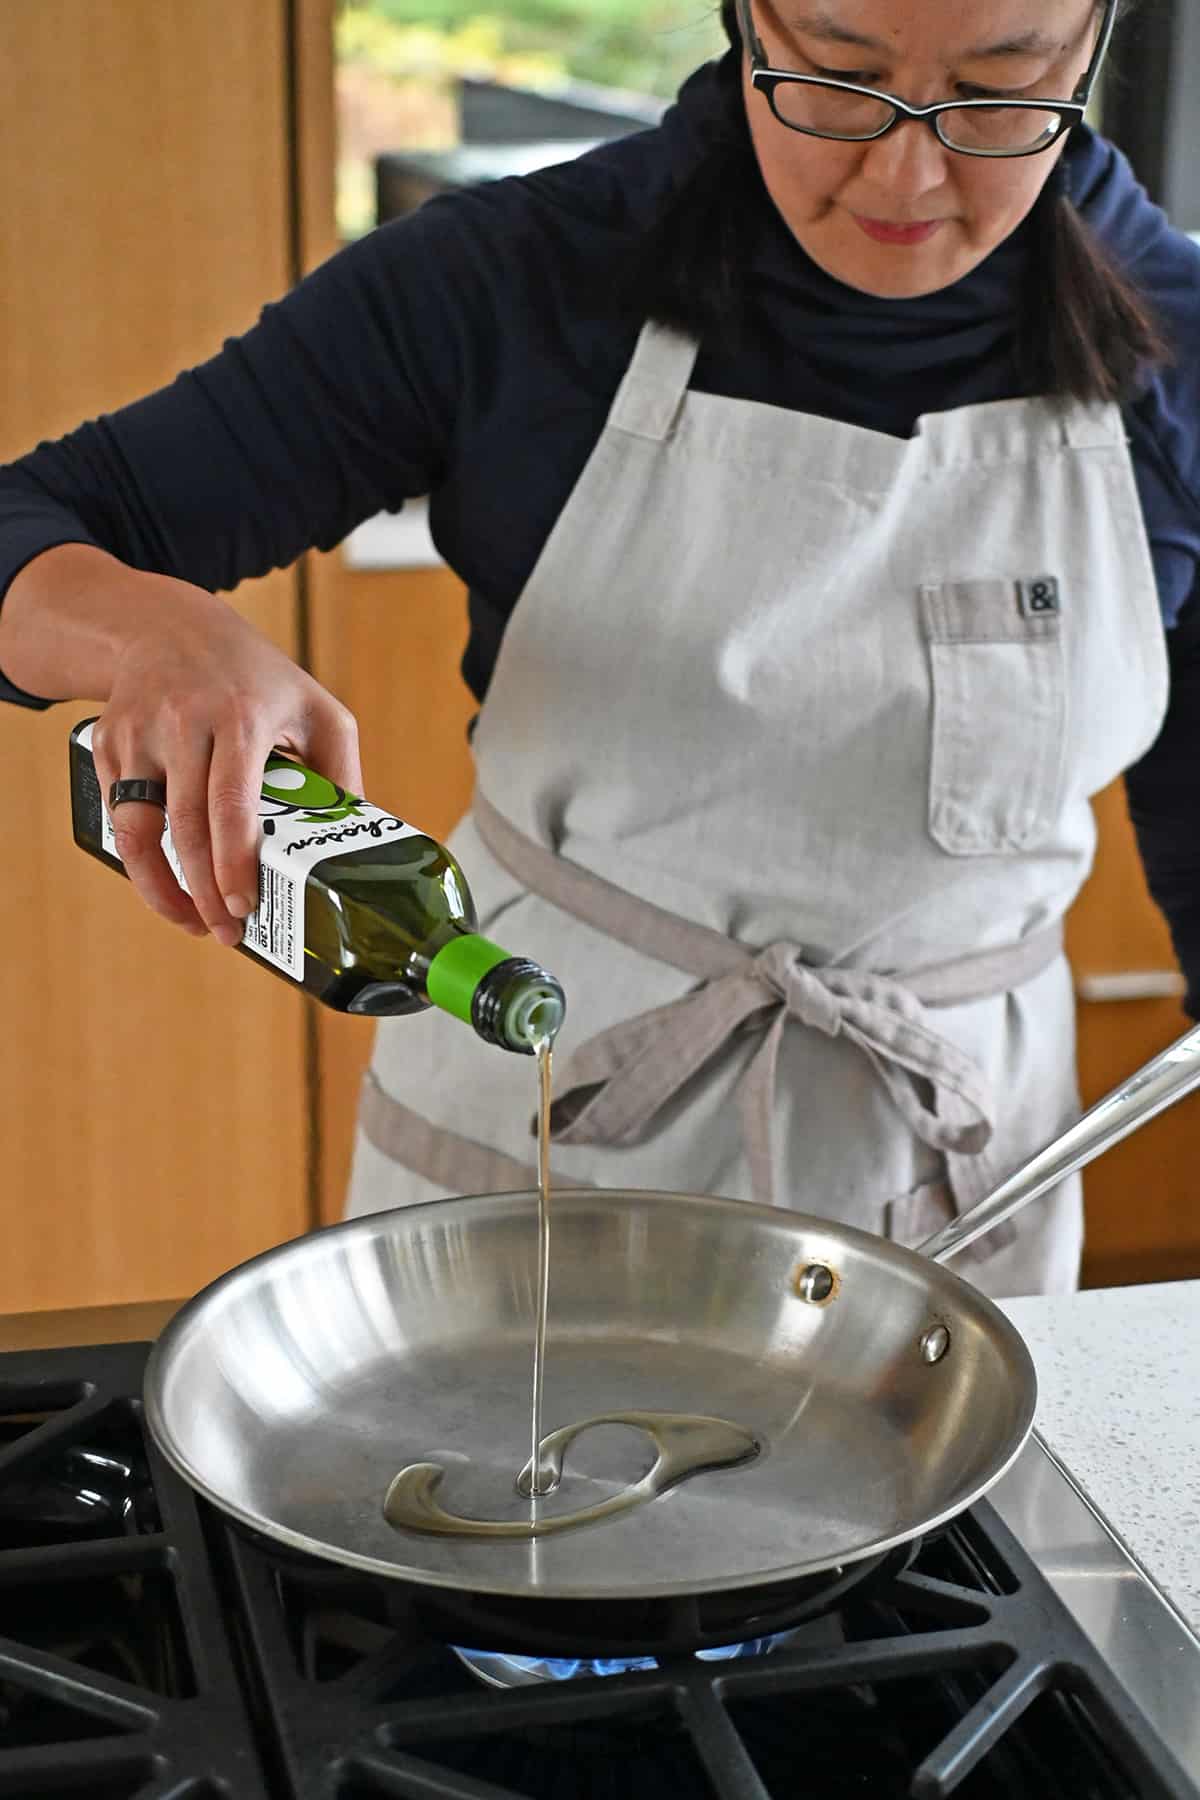 An Asian woman adds avocado oil into a hot large stainless steel skillet.